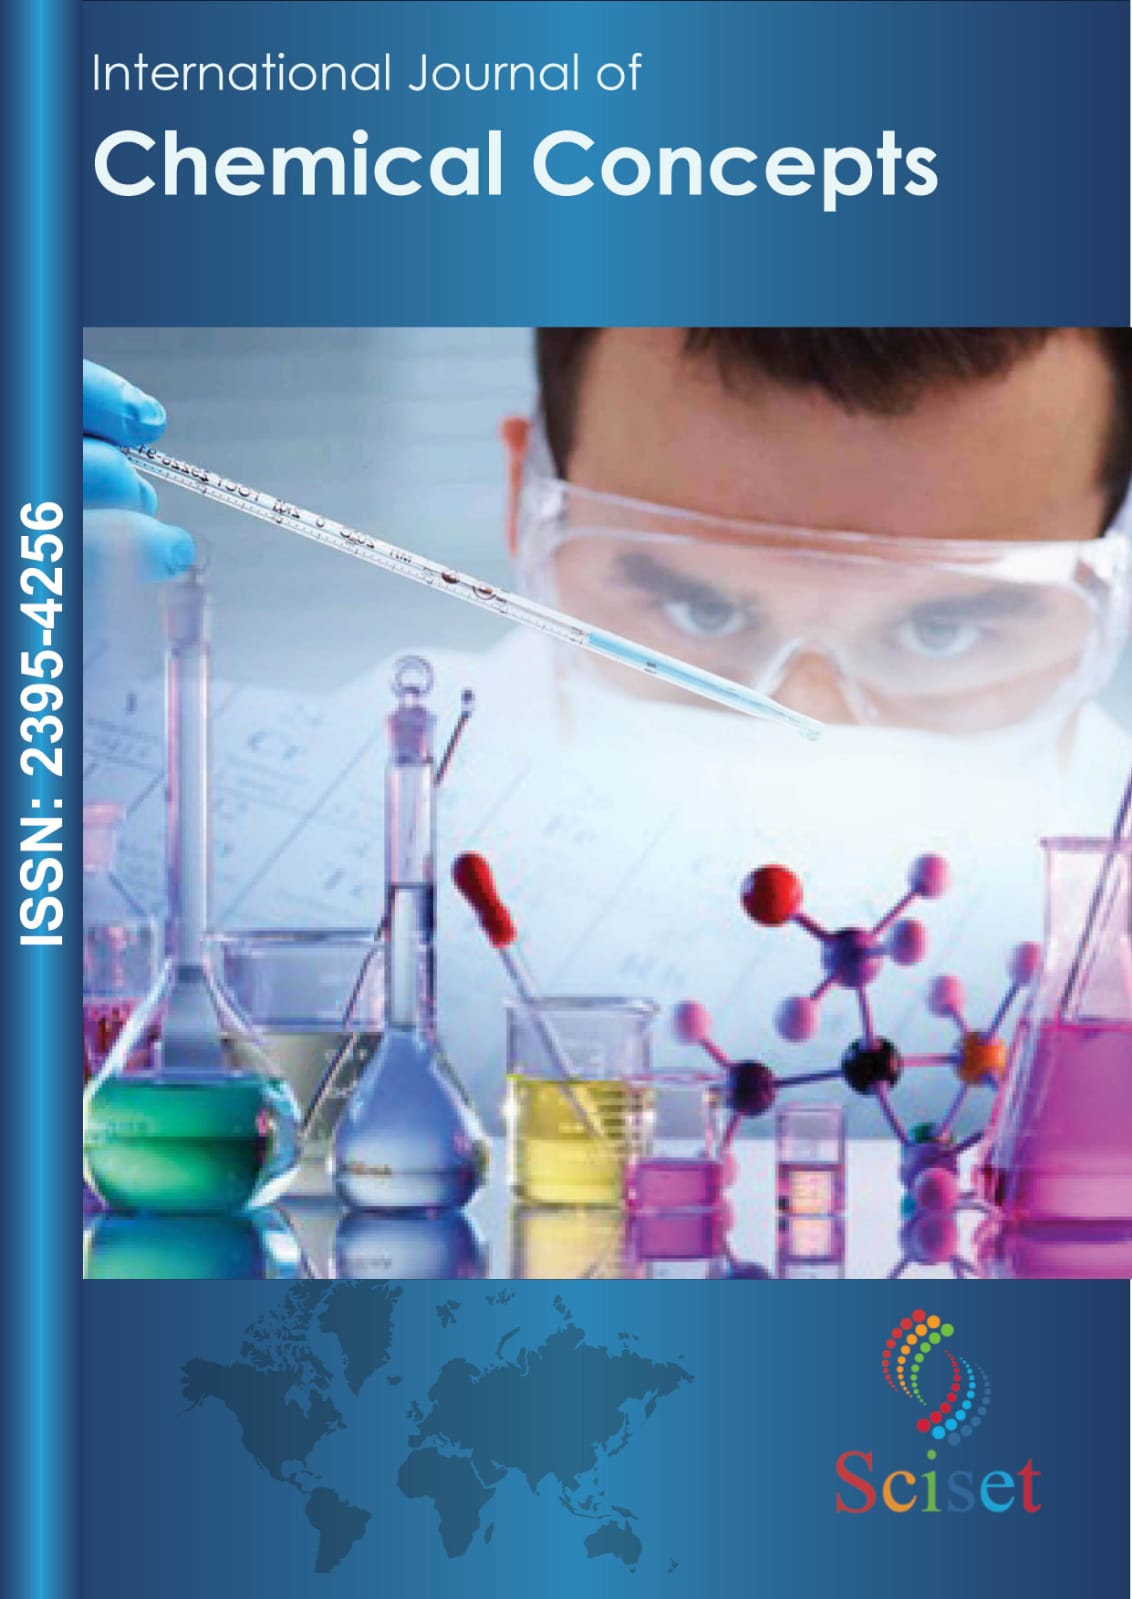 International Journal of Chemical Concepts 